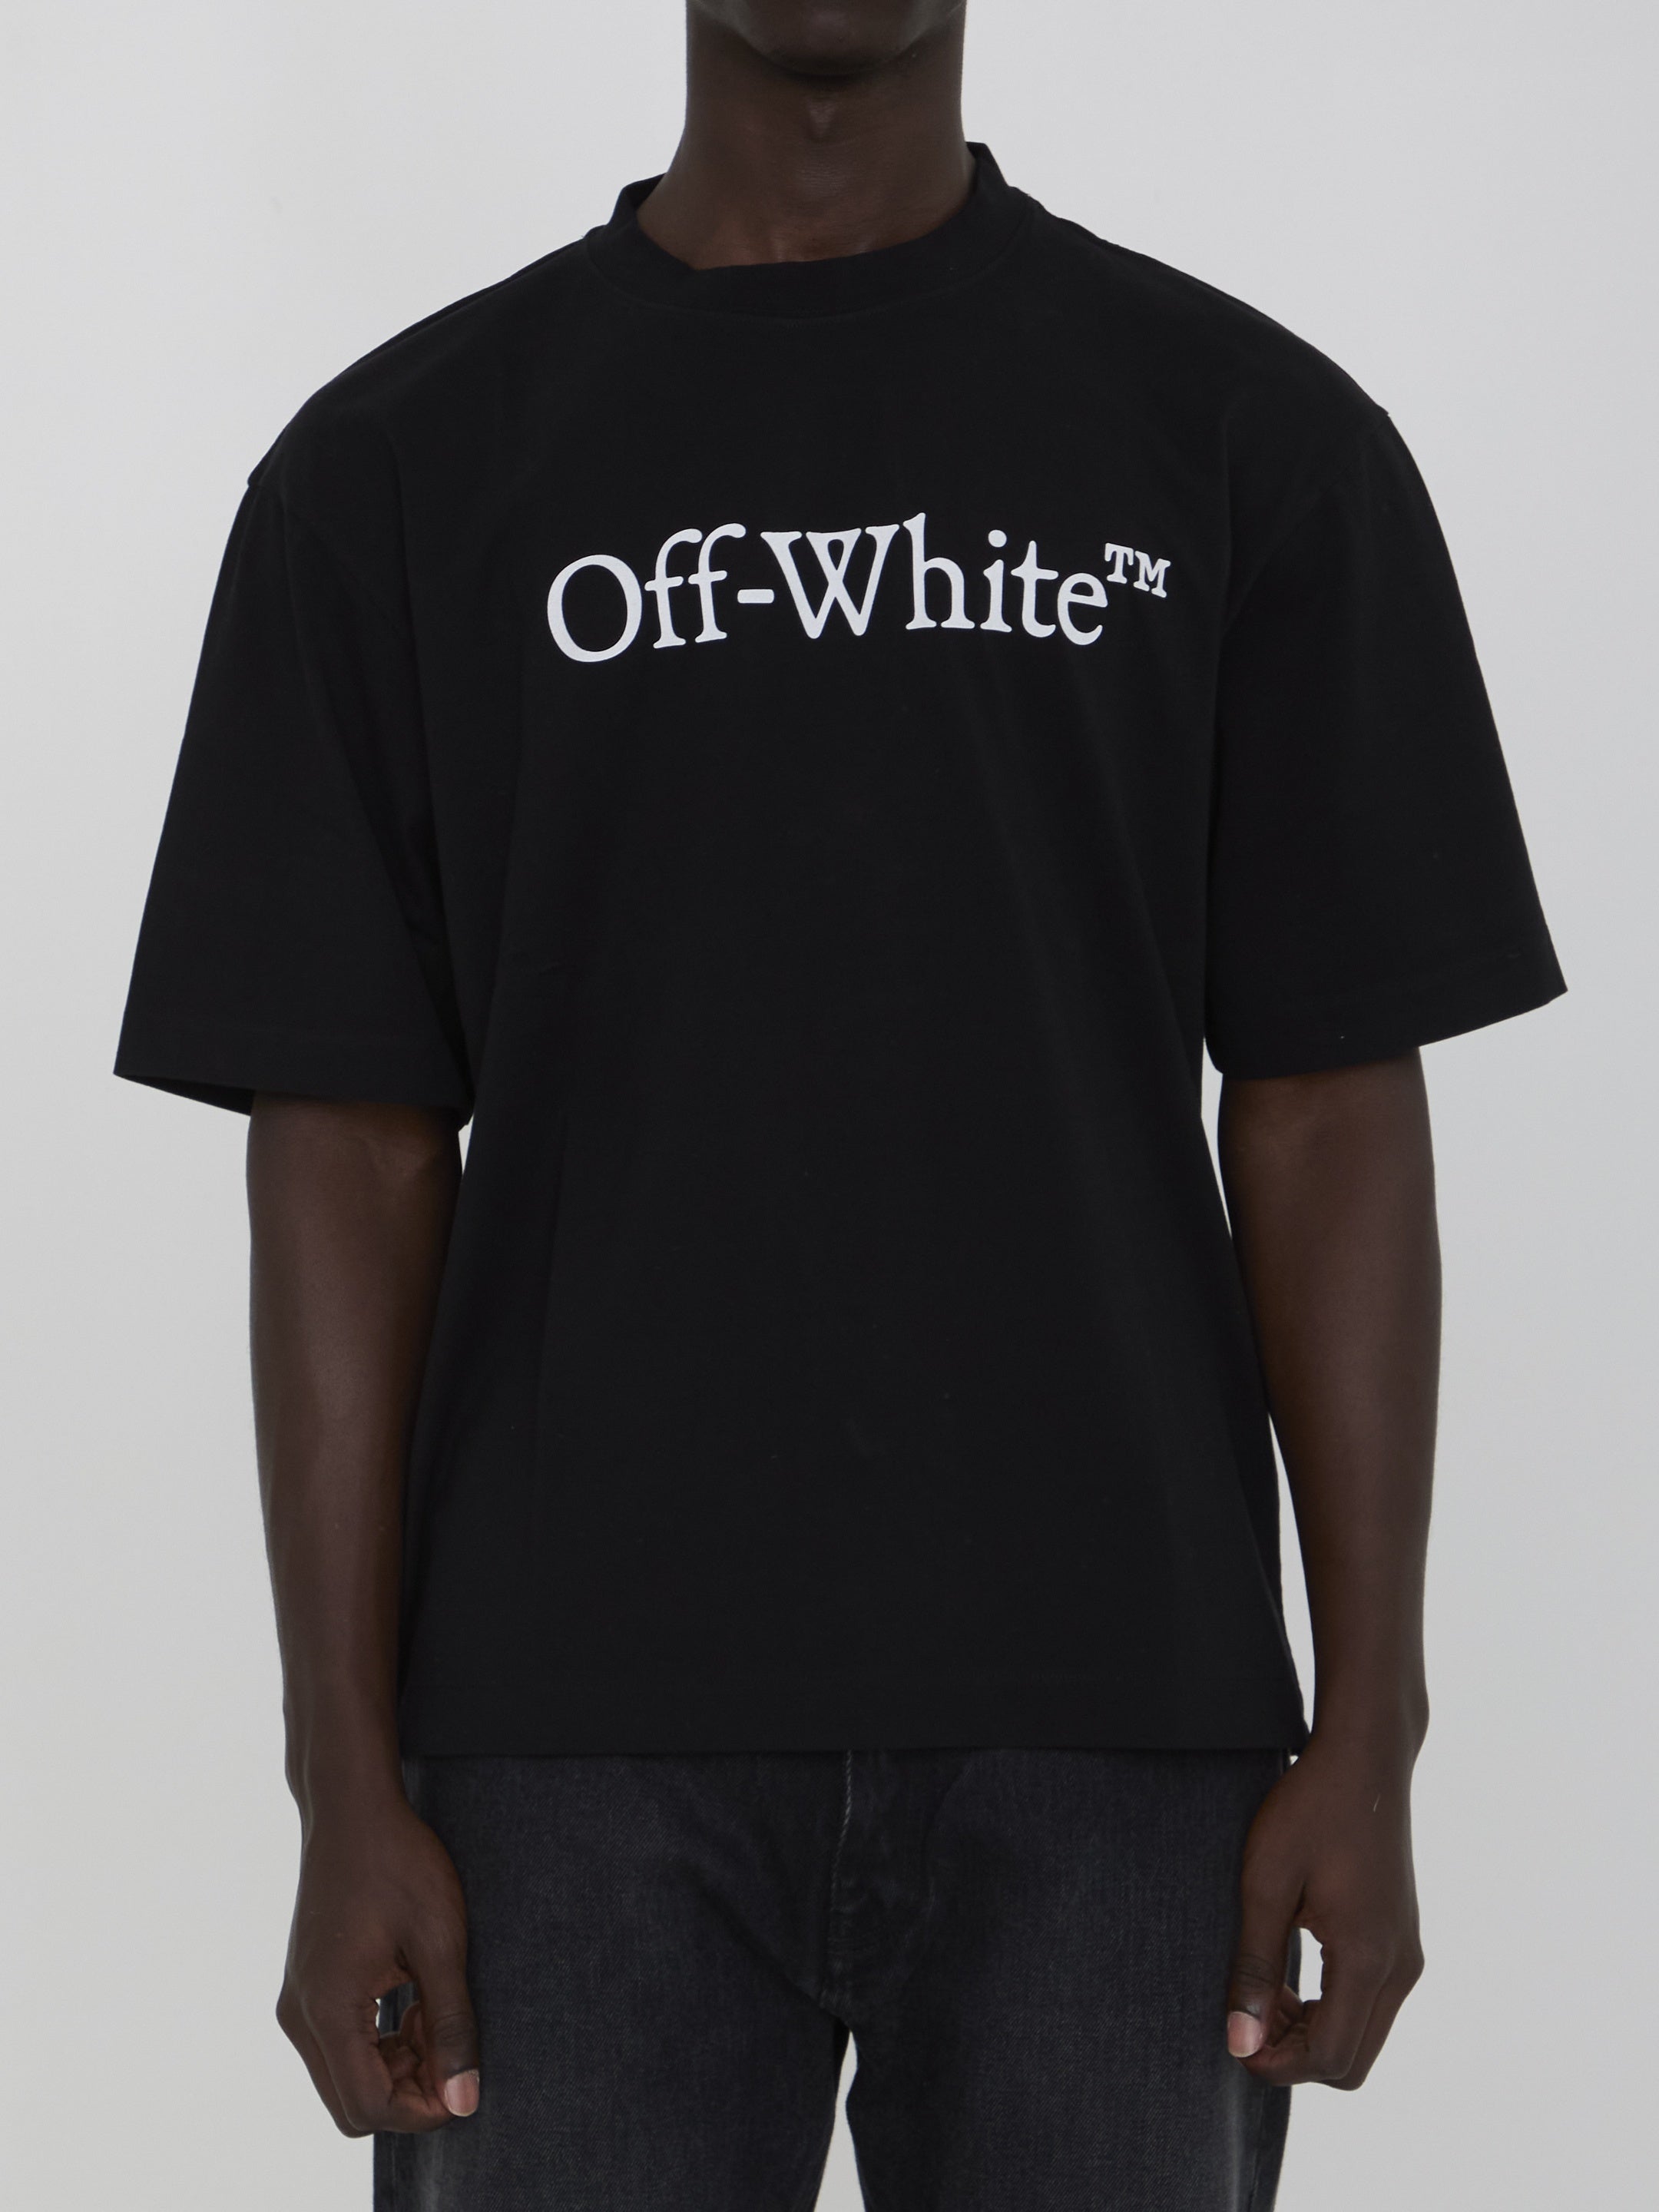 OFF-WHITE-OUTLET-SALE-Big-Bookish-Skate-t-shirt-Shirts-L-BLACK-ARCHIVE-COLLECTION.jpg